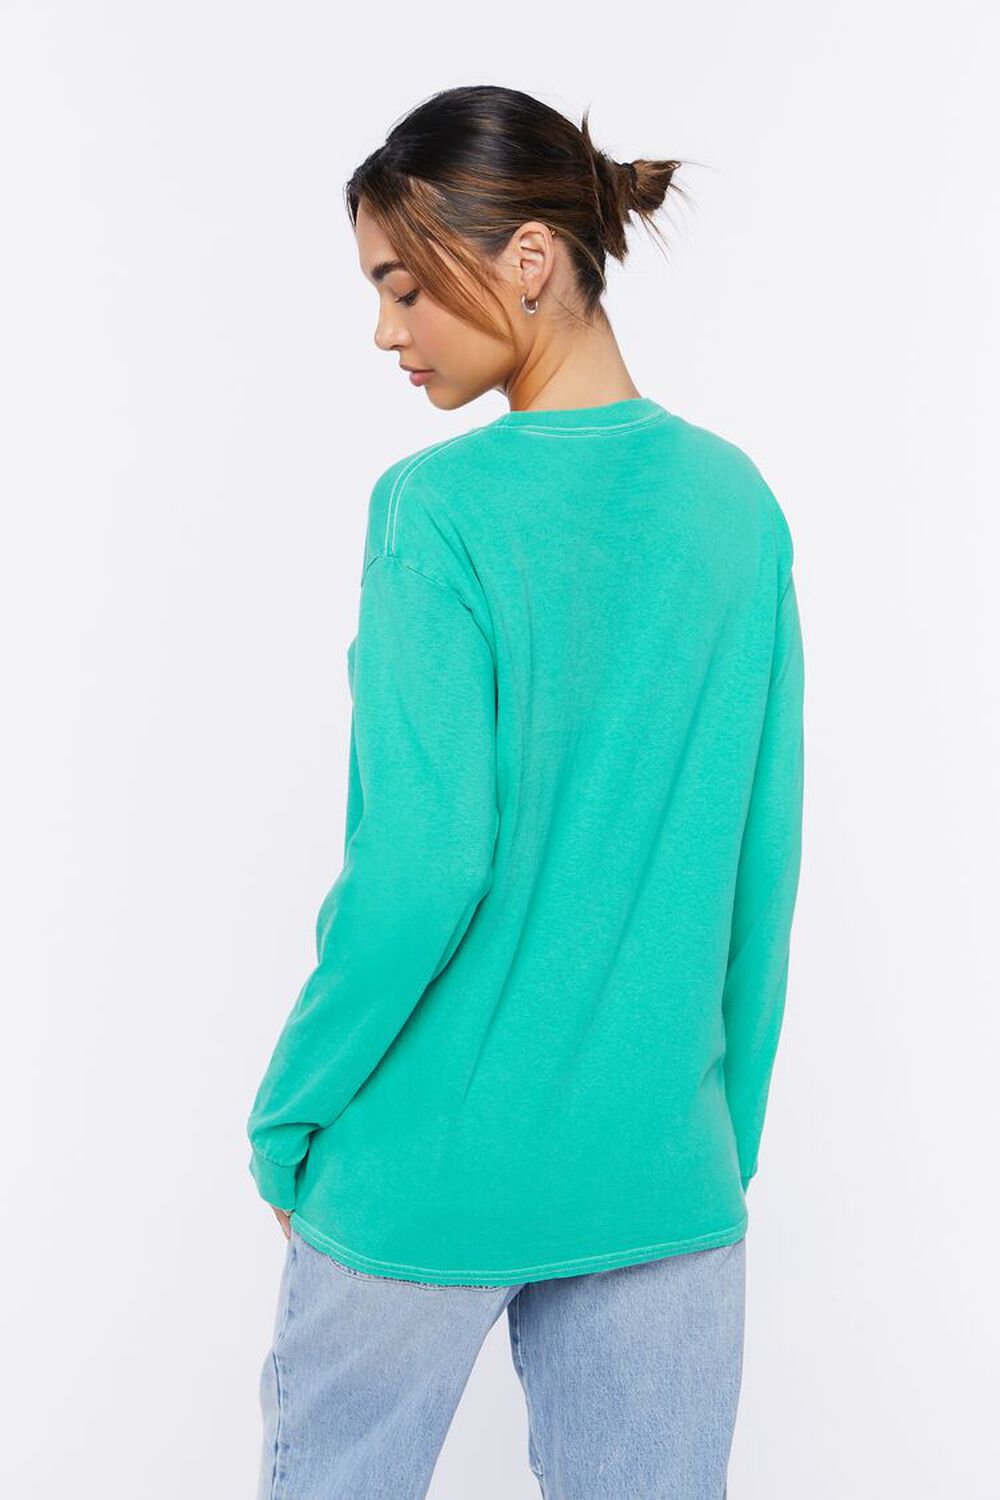 GREEN/MULTI Happiness Graphic Long-Sleeve Tunic, image 3